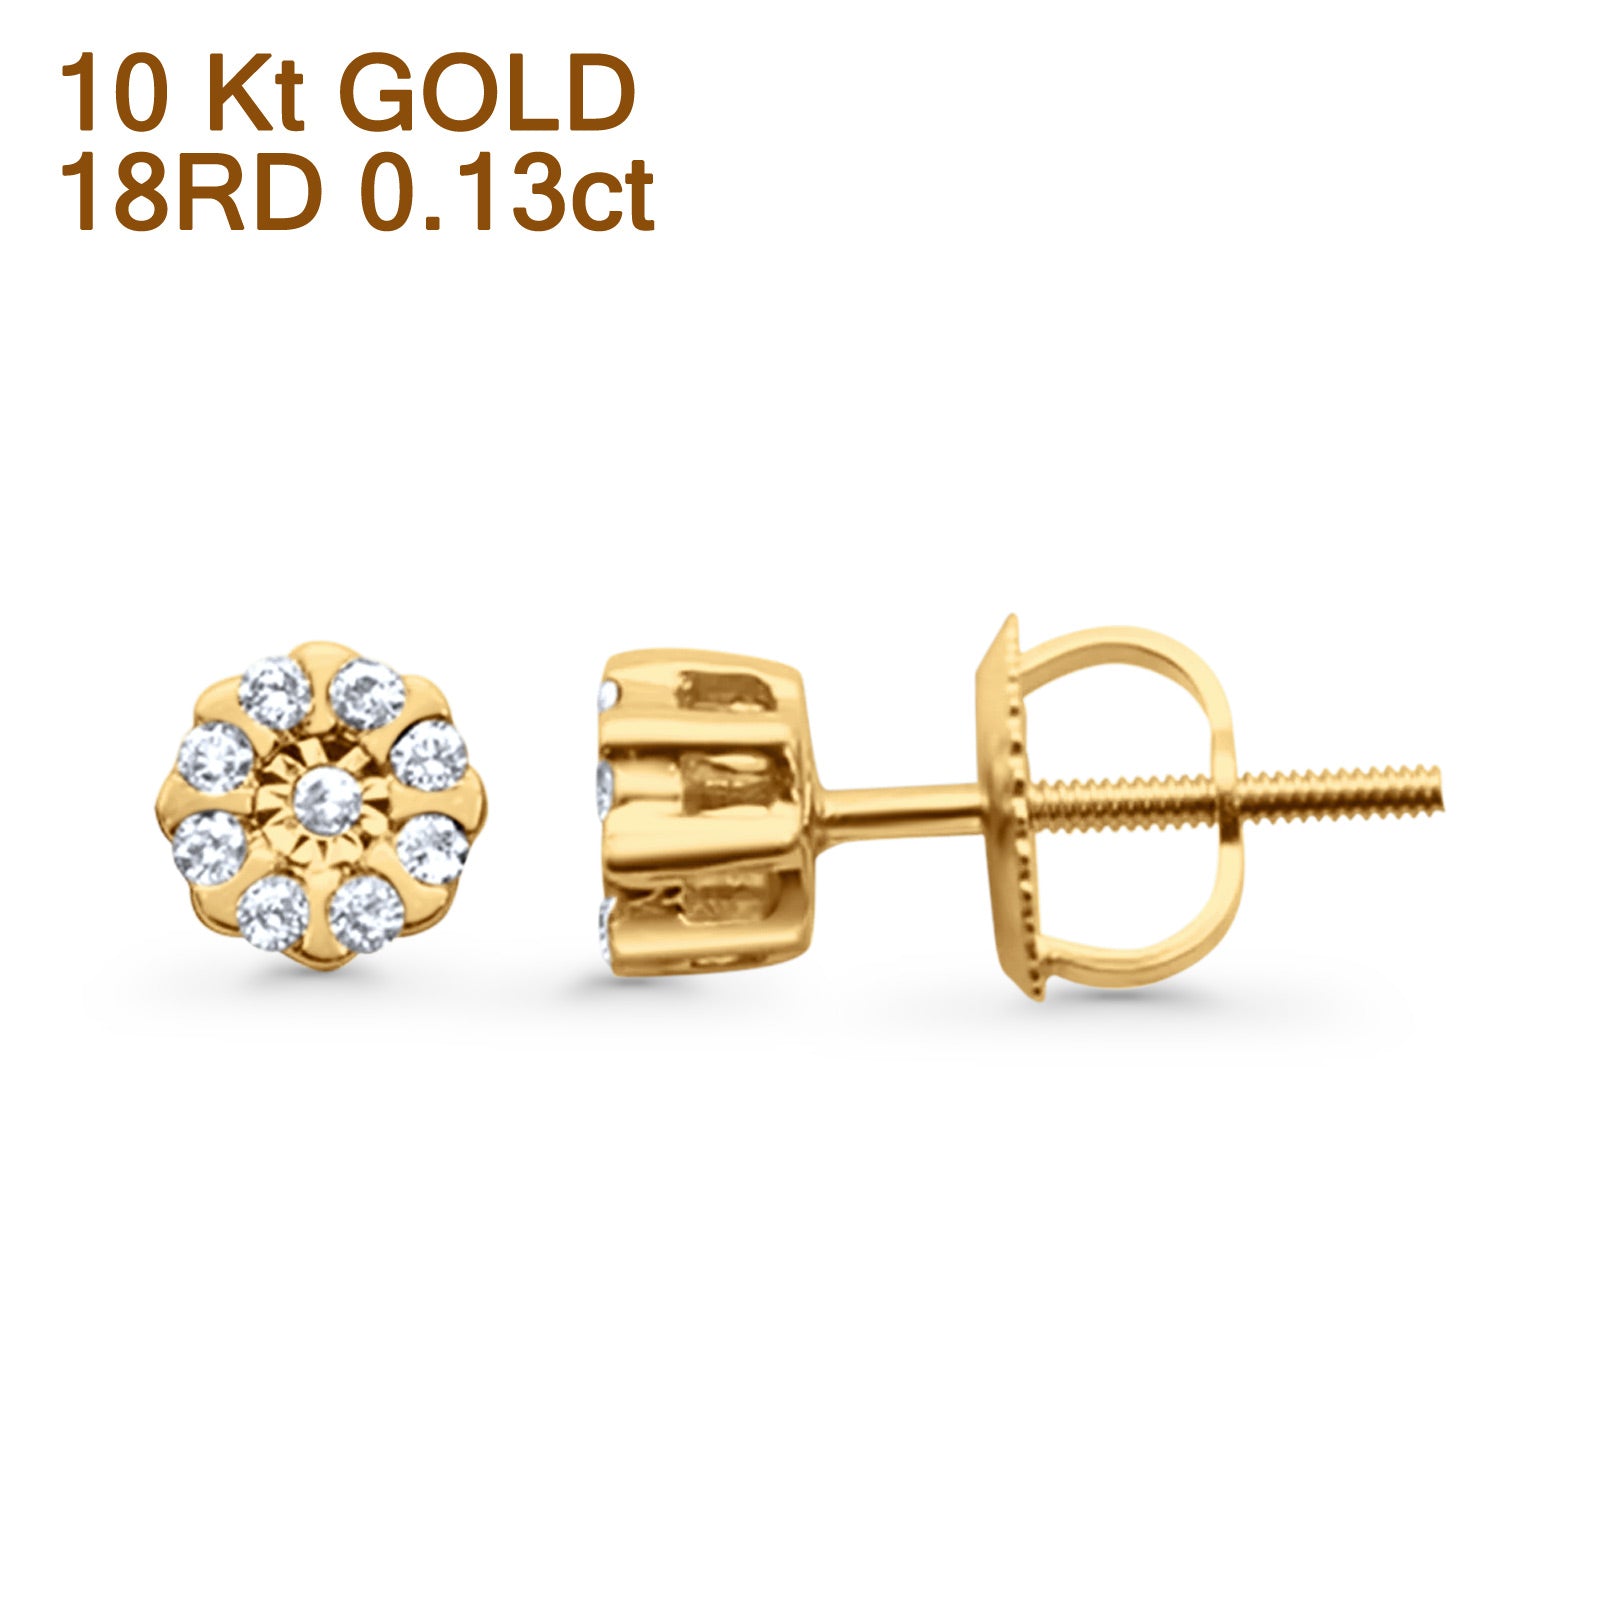 Solid 10K Gold 5.3mm Round Cluster Diamond Stud Earrings